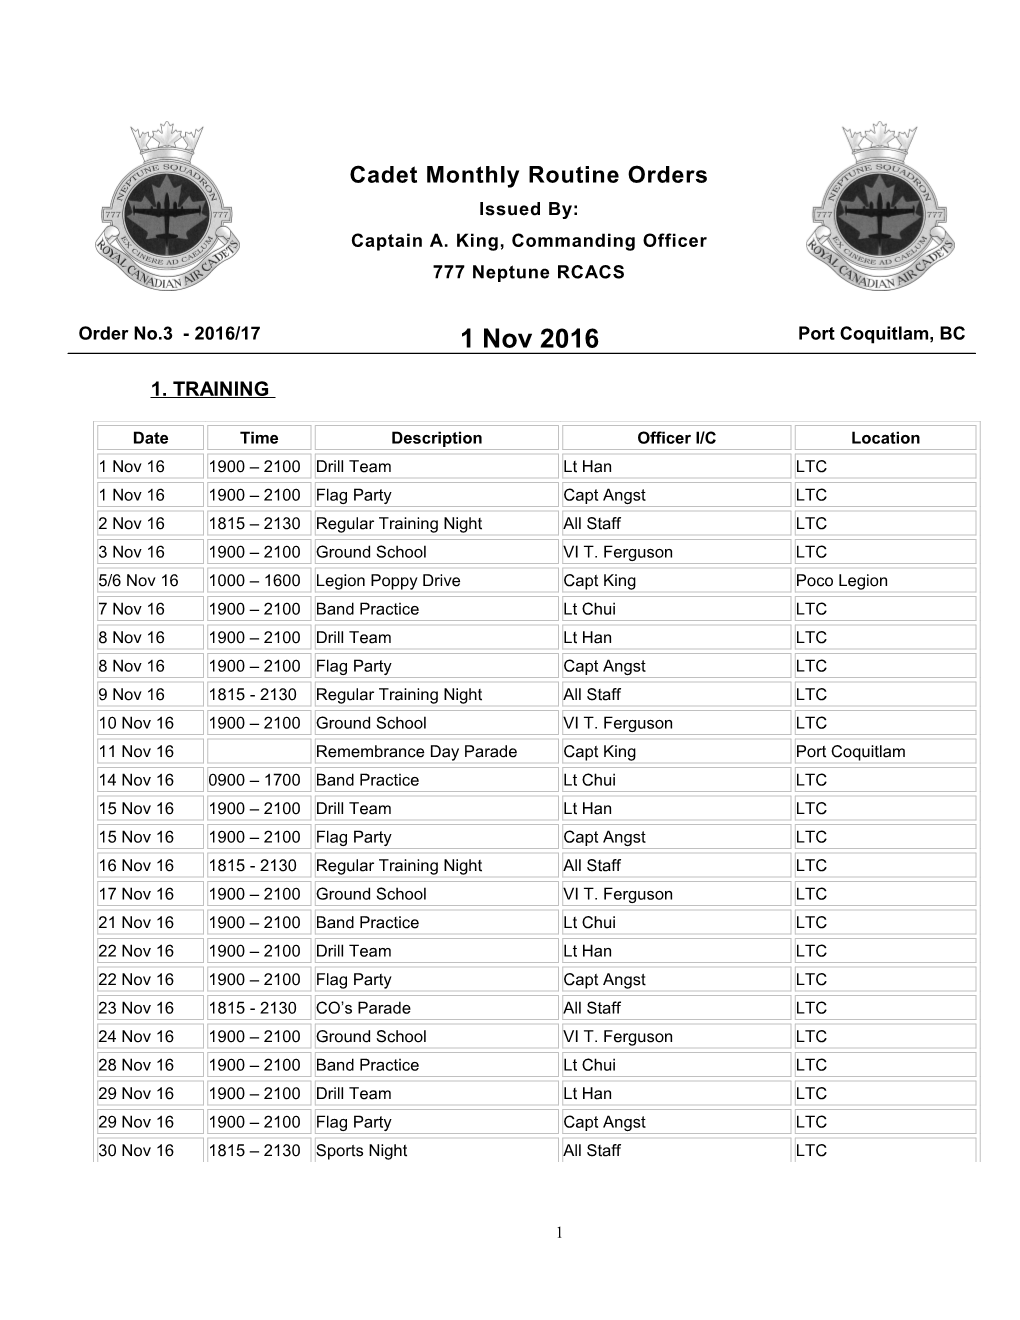 Cadet Monthly Routine Ordersissued By:Captain A. King, Commanding Officer777 Neptune RCACS